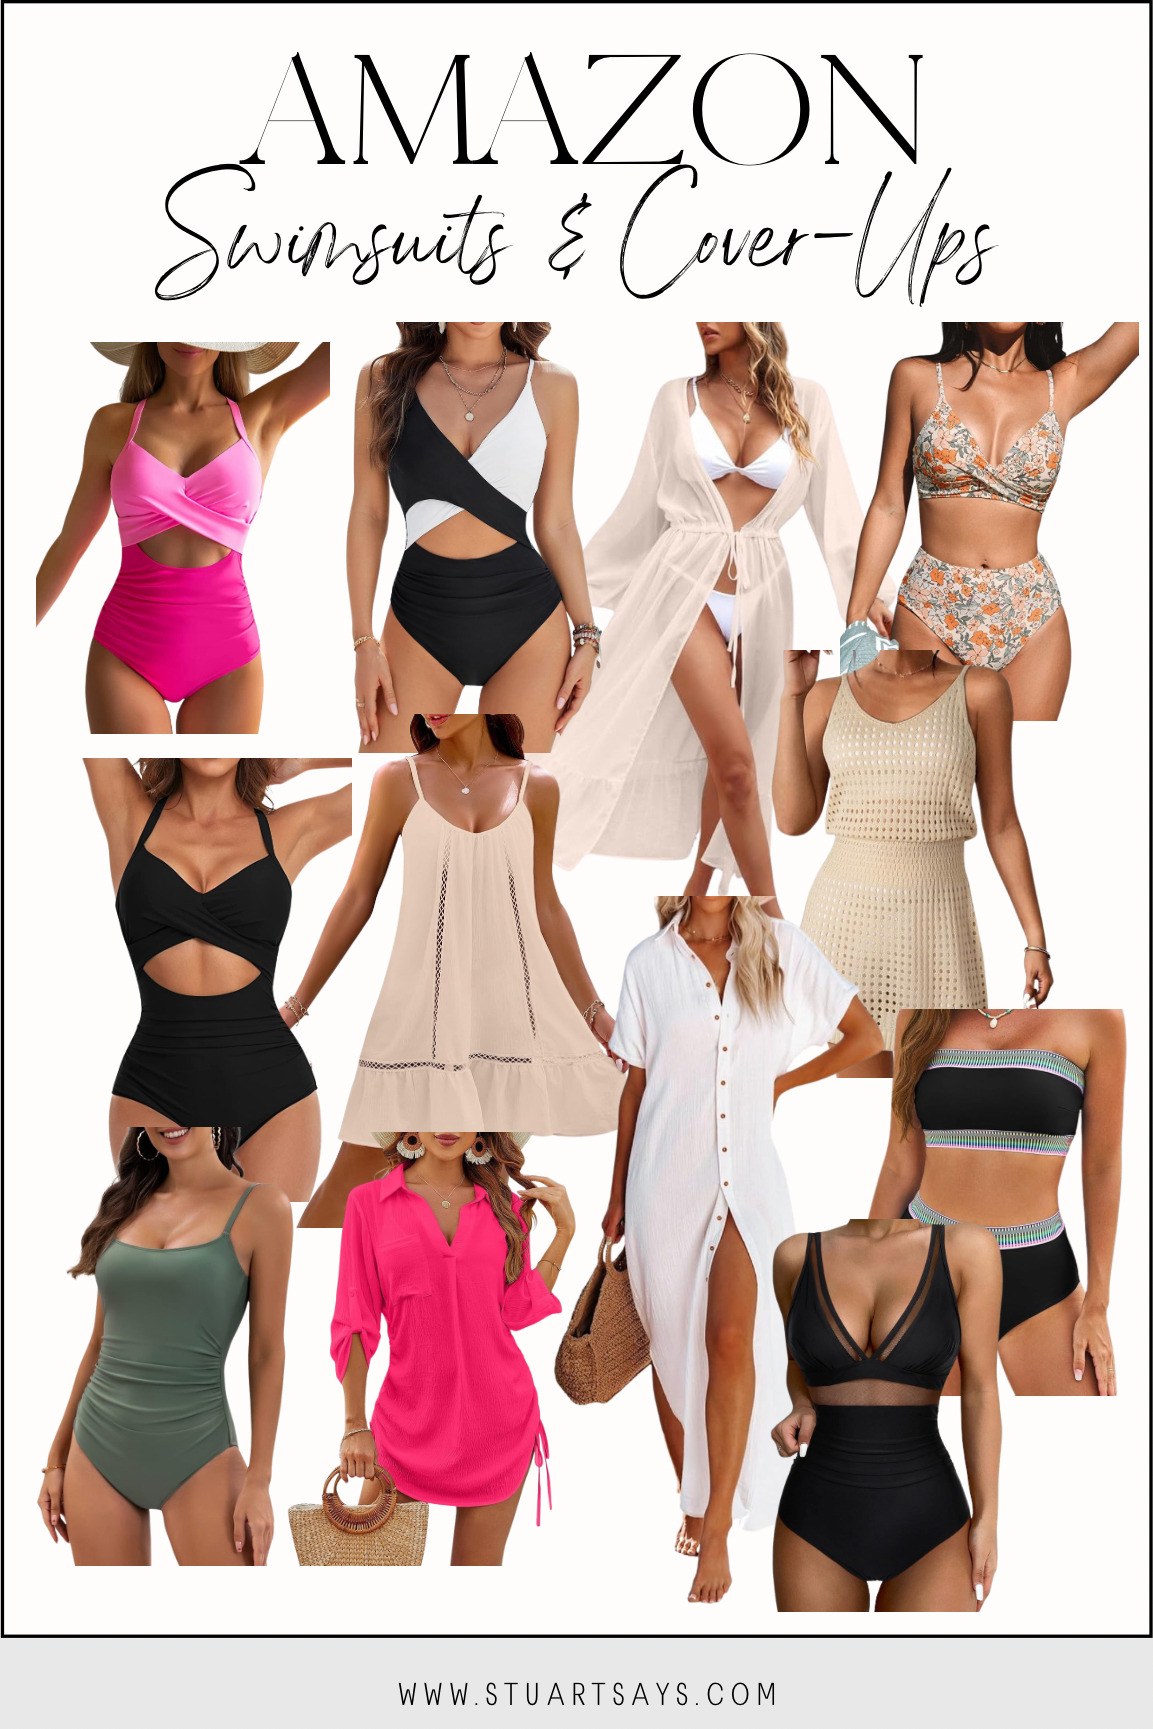 Amazon Swimsuits & Cover-ups